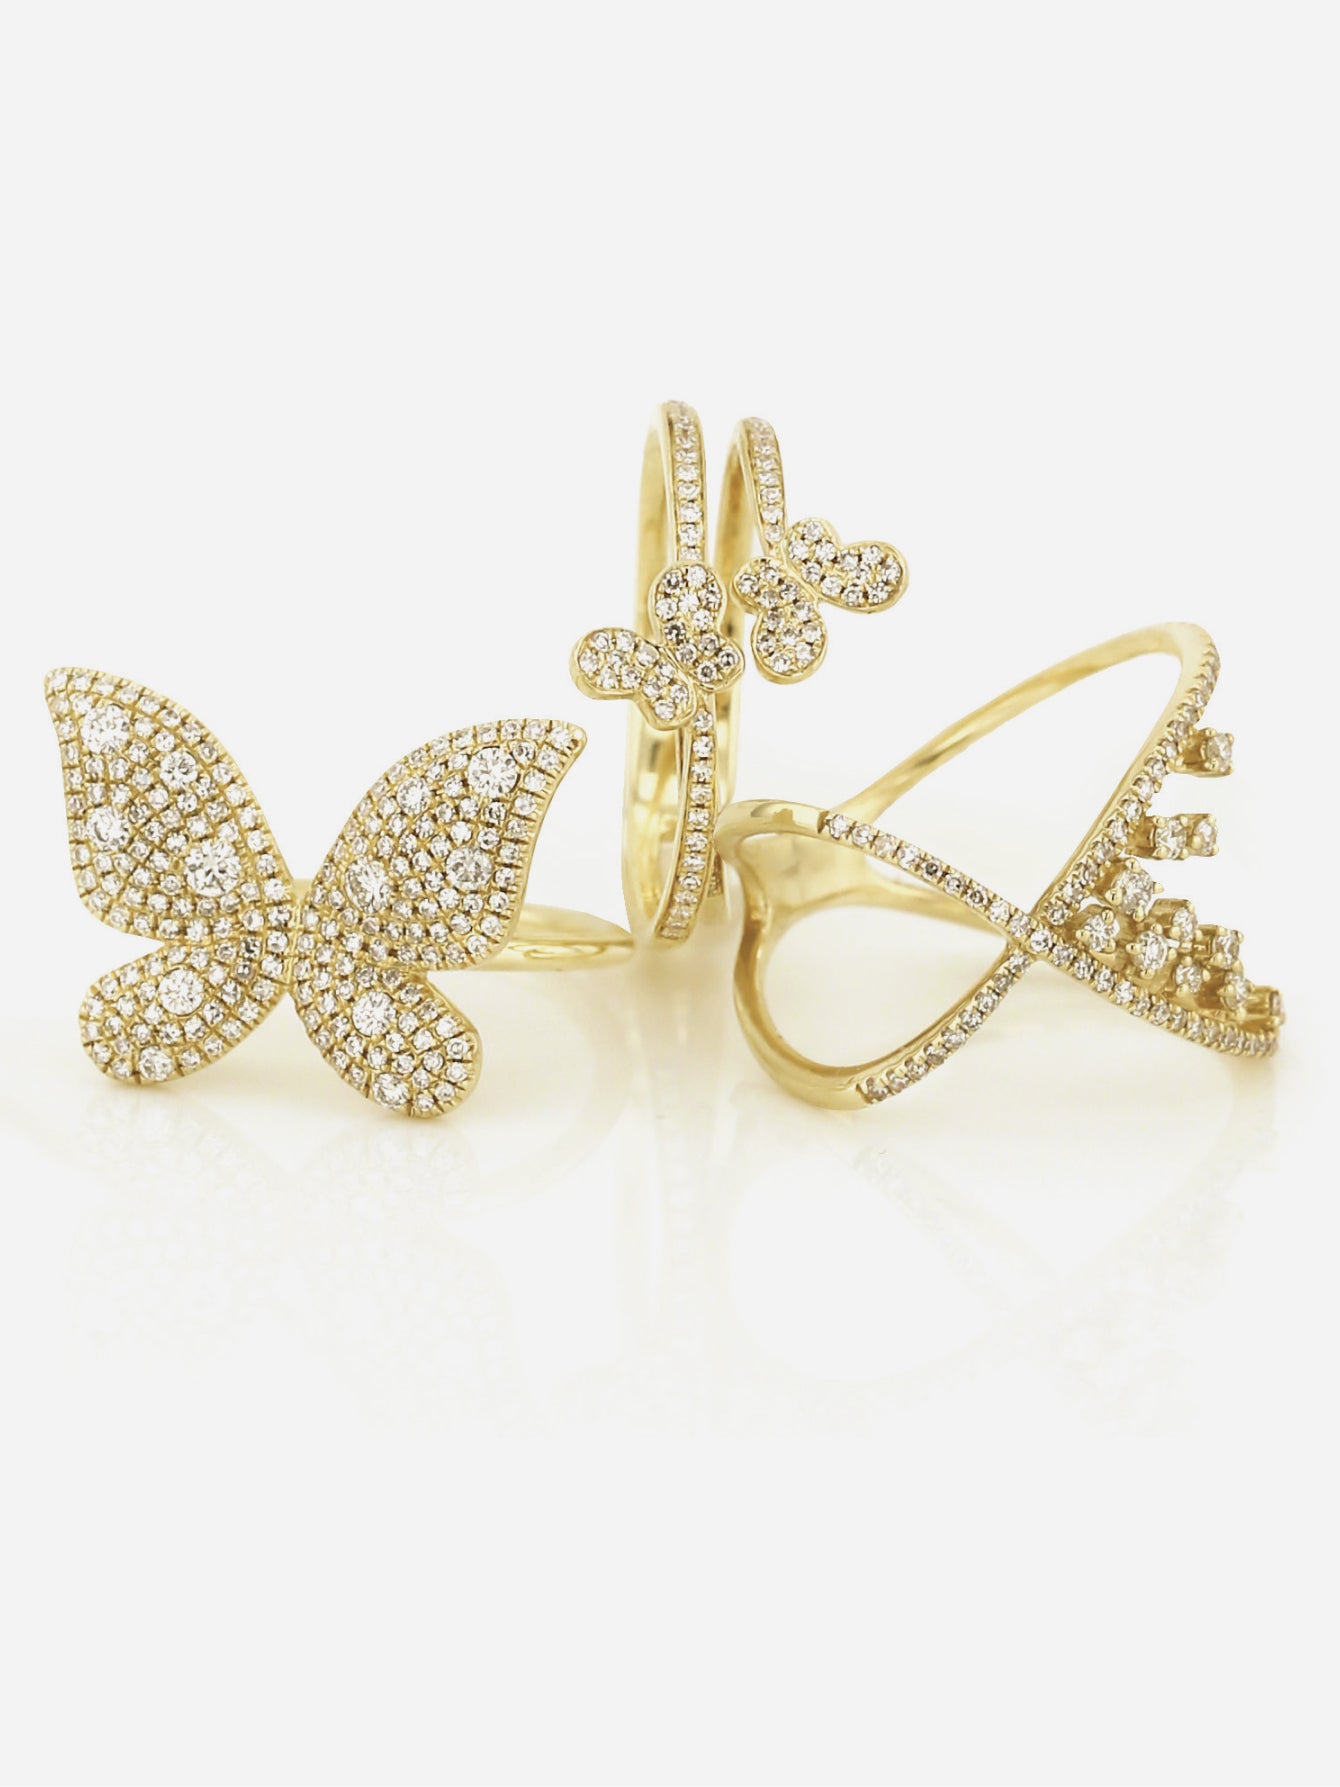 Three of our fashion rings, two with designs featuring butterflys.